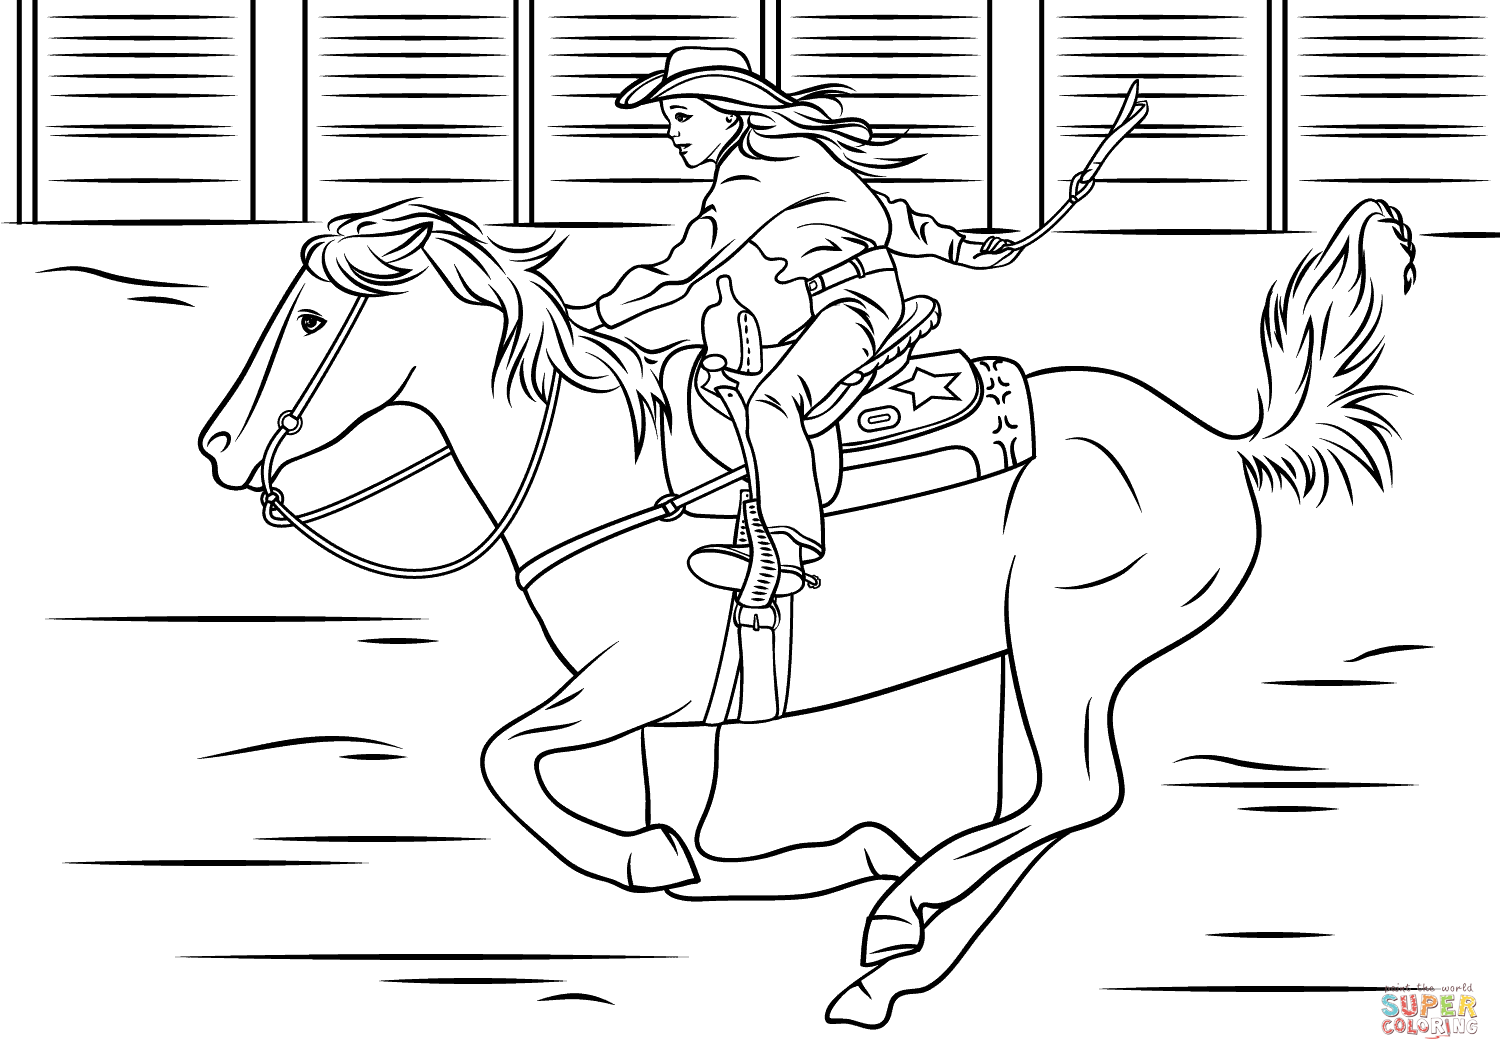 cowgirl-riding-horse-coloring-page-free-printable-coloring-pages